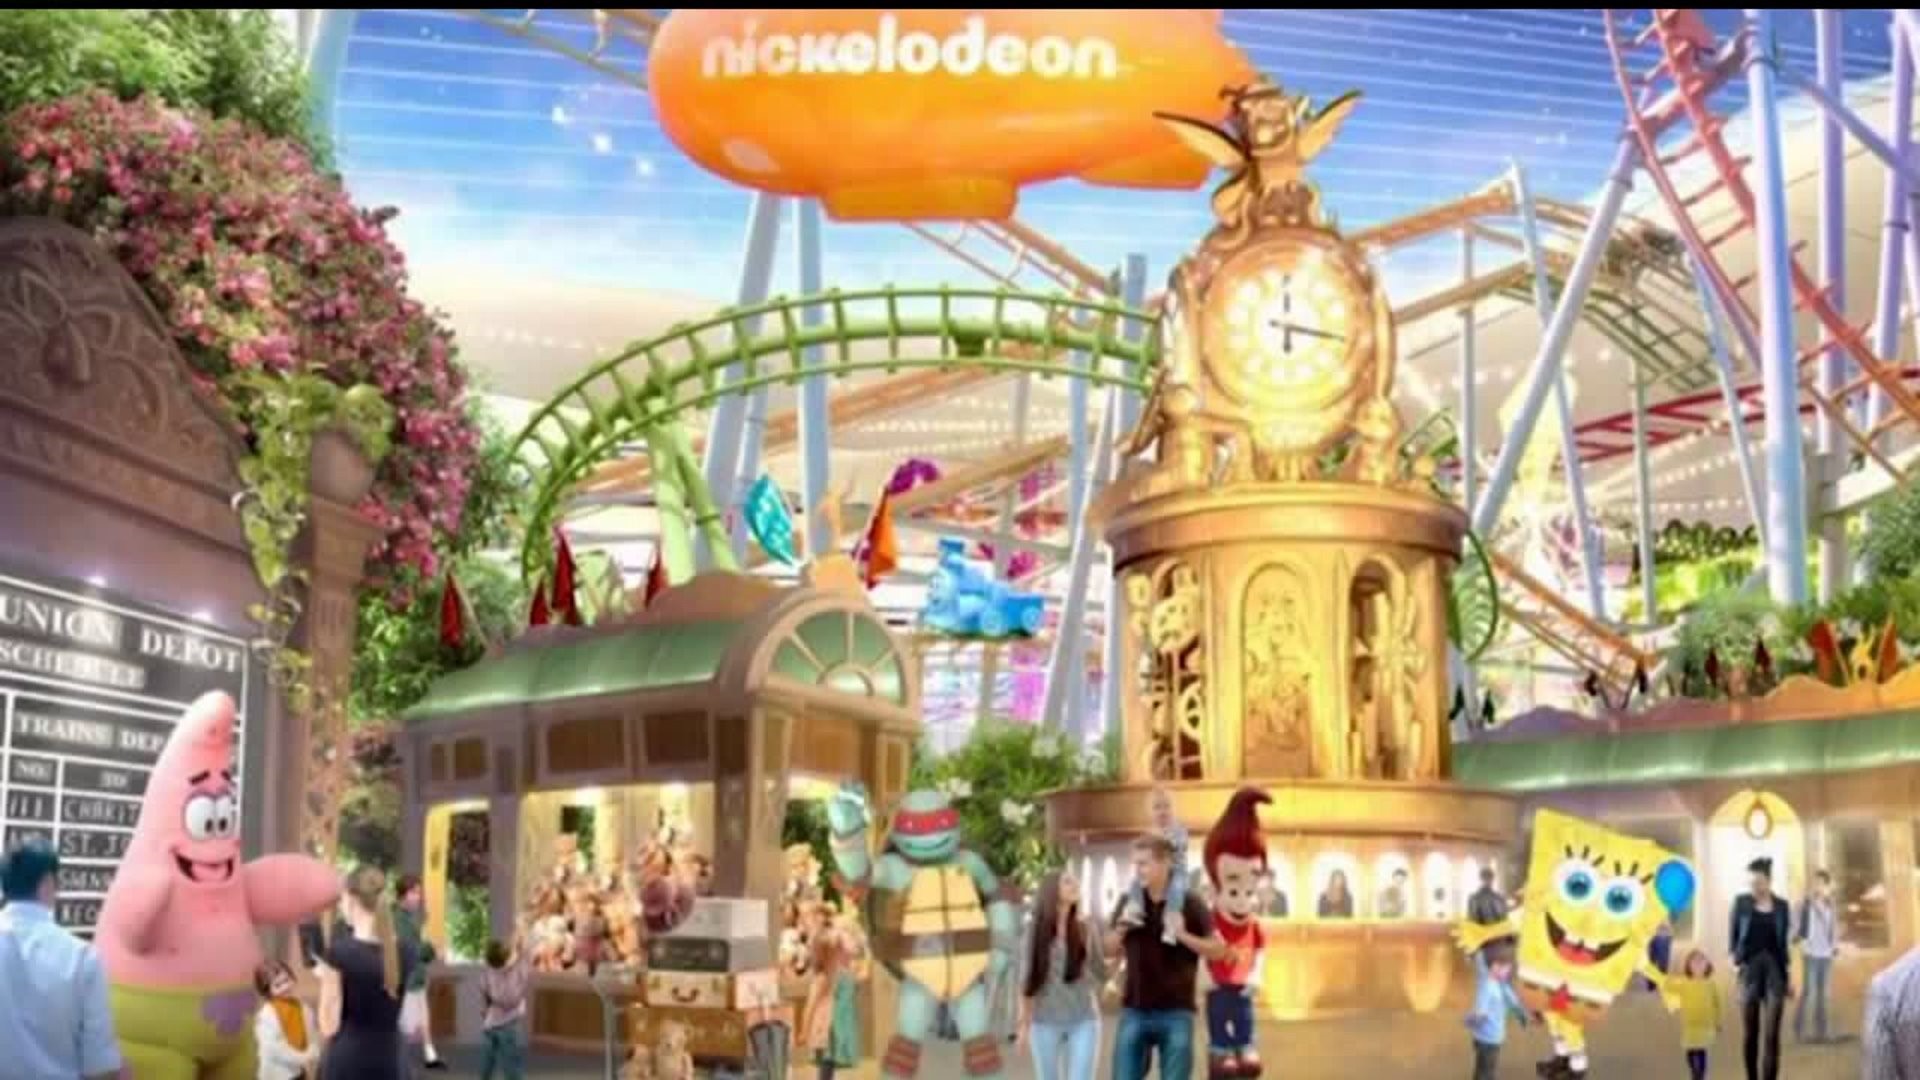 Nickelodeon Universe, the largest indoor theme park in North America, opens this week